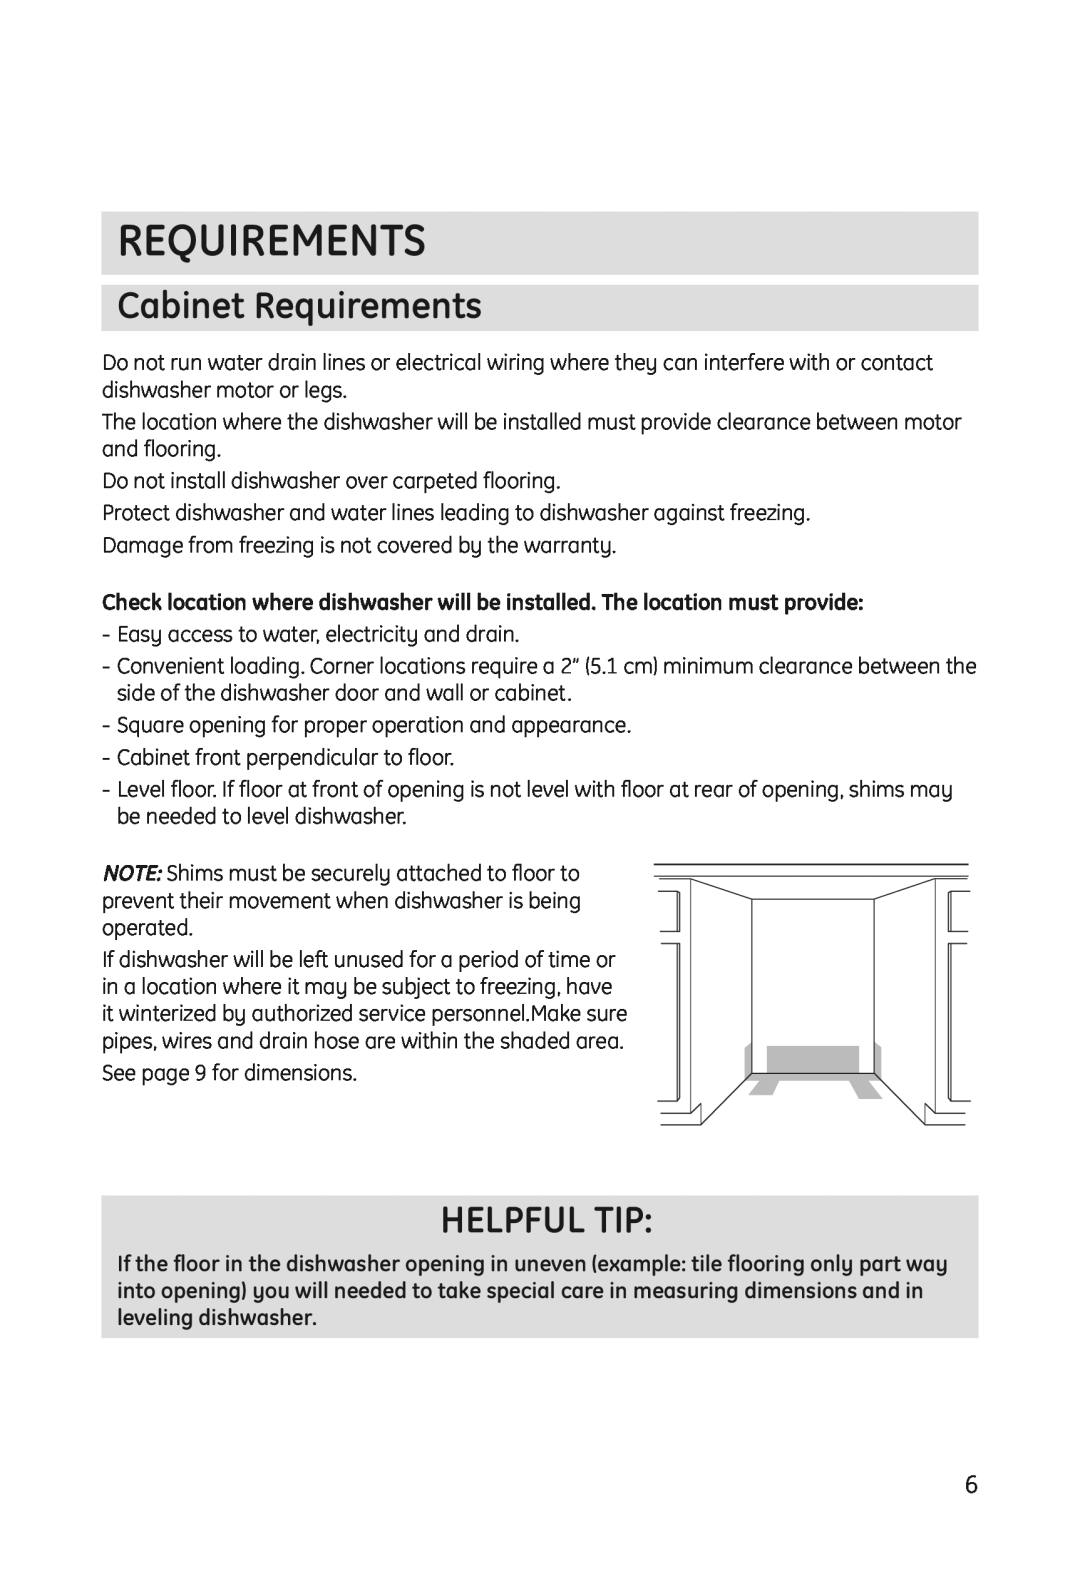 Haier DWL3025 installation manual Cabinet Requirements, Helpful Tip 